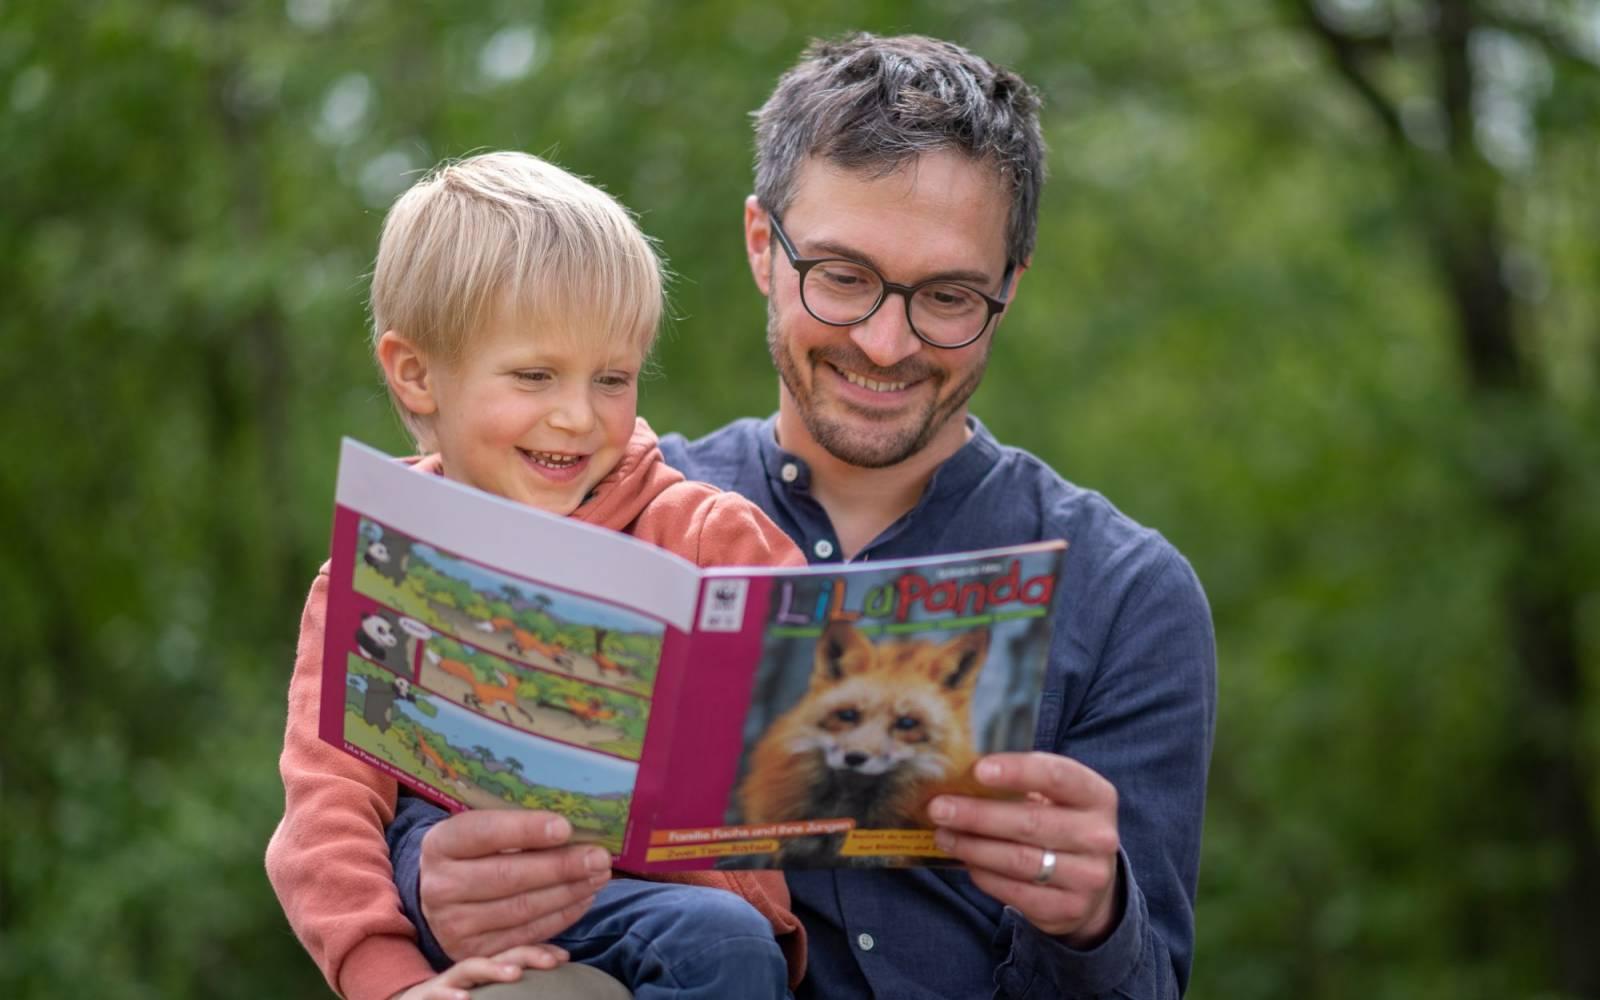 A father and his toddler son reading the LiLu Panda magazine together